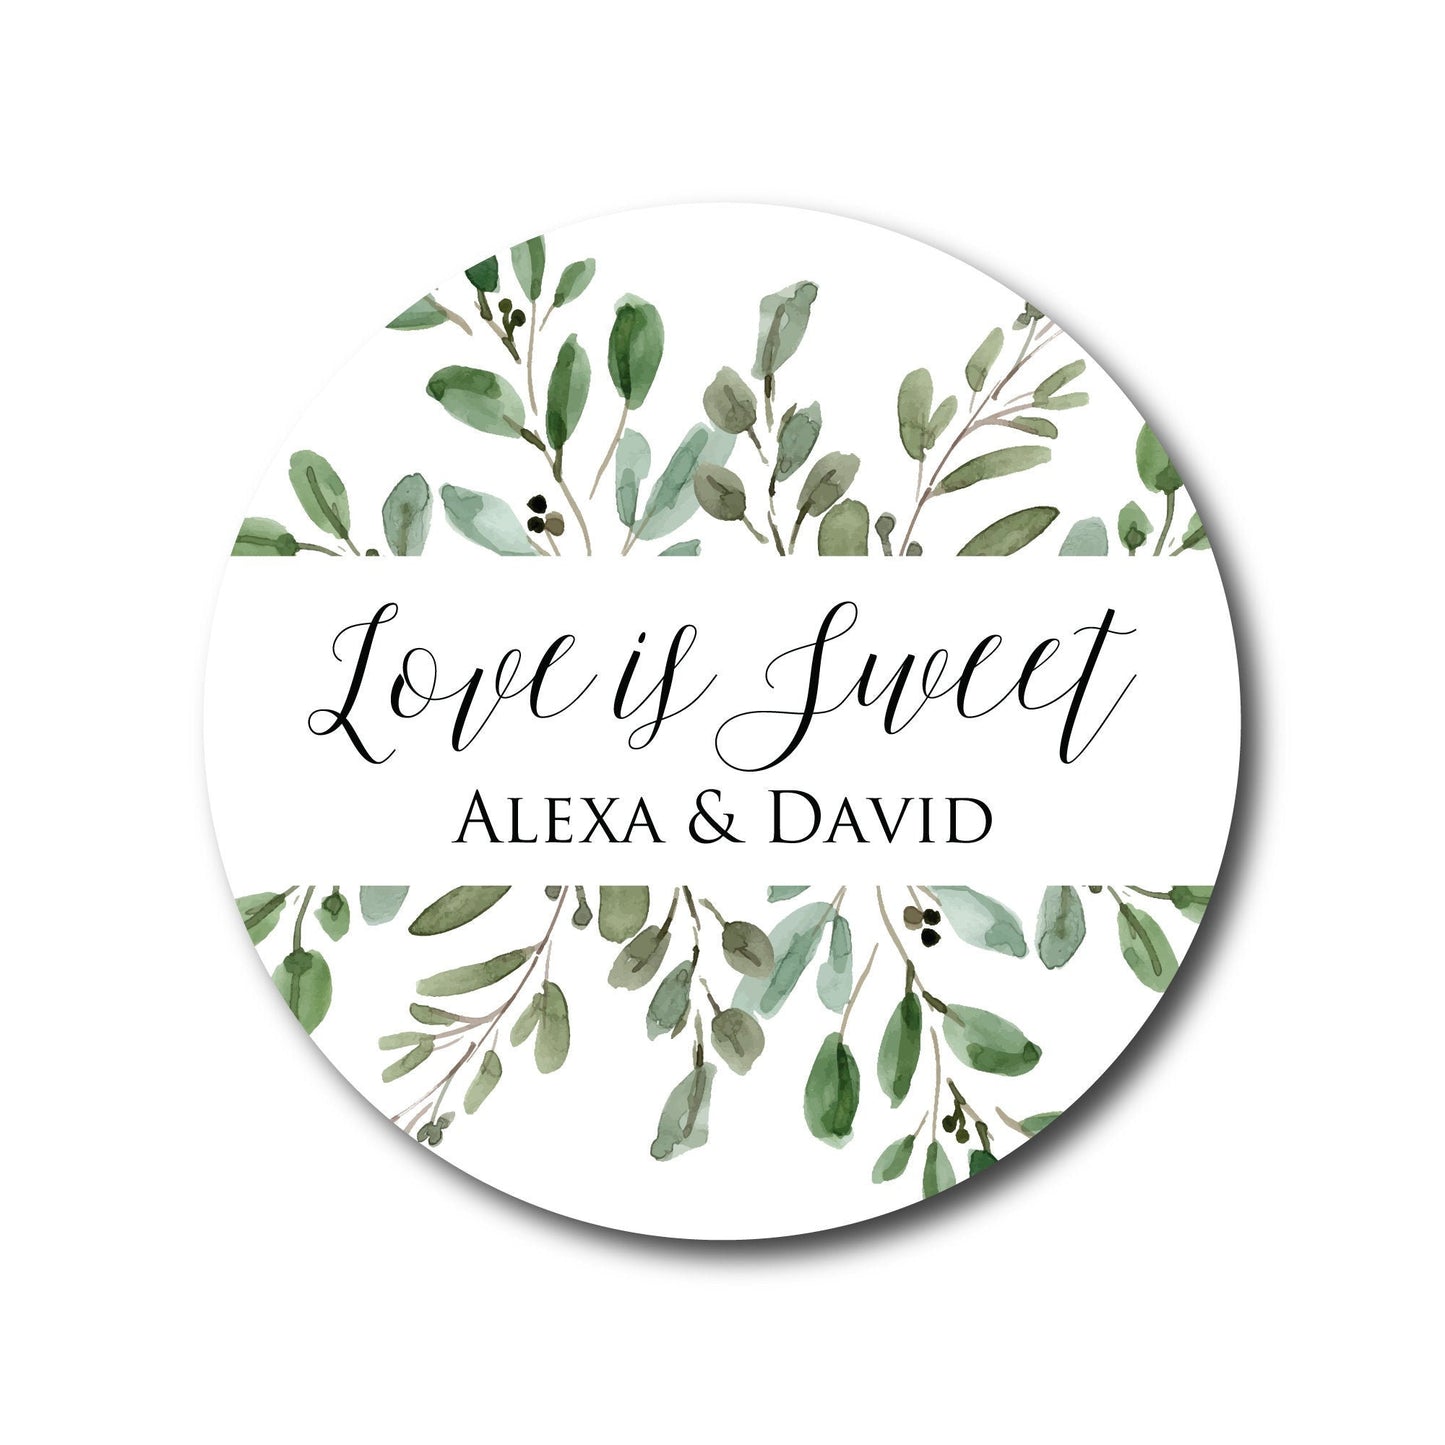 Love is Sweet Wedding Stickers for Favors Wedding Favor Stickers Thank You Stickers Greenery Botanical Wedding Favor Tags Olive Leaves